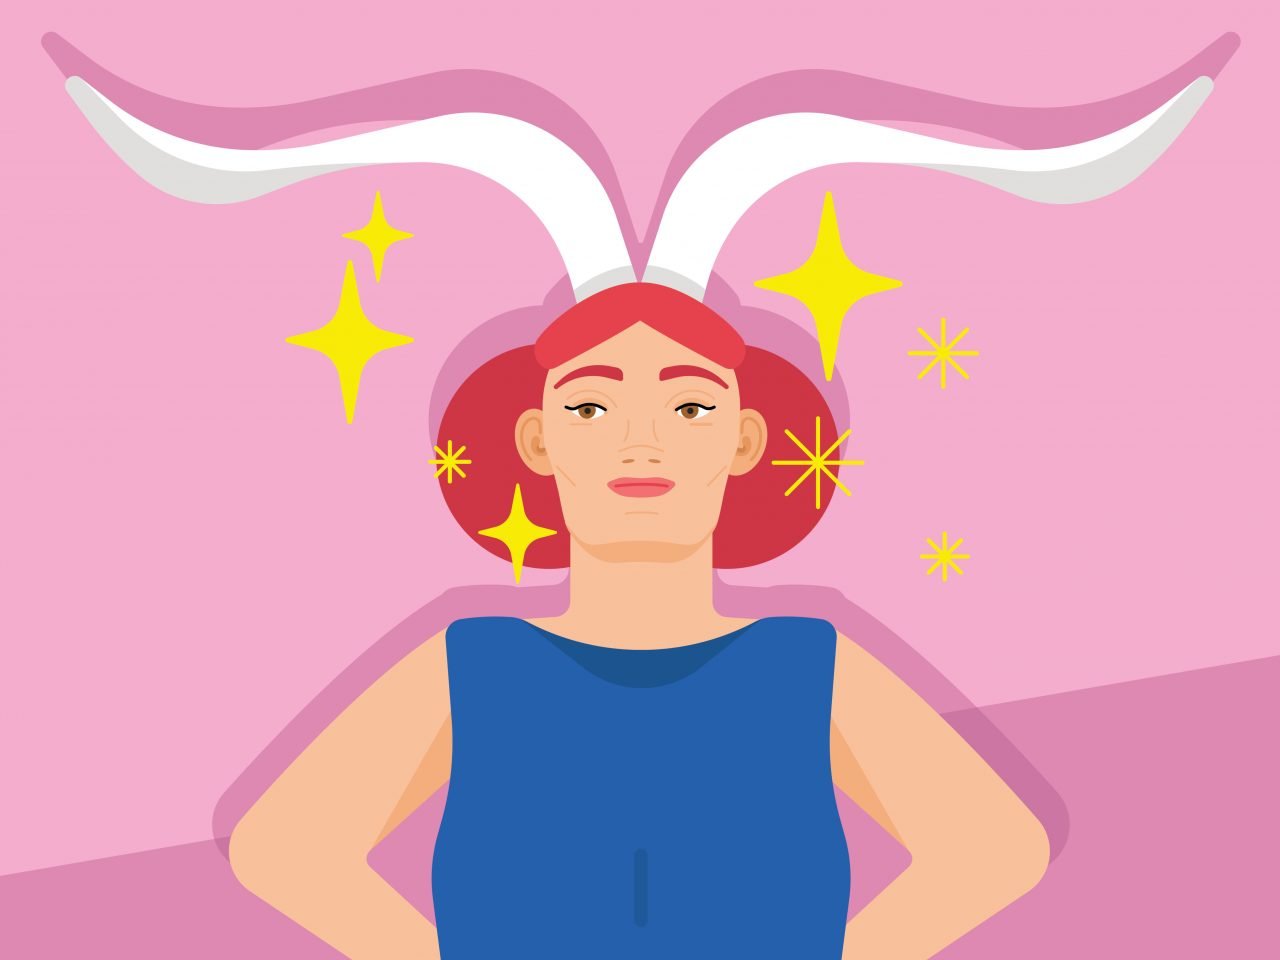 A woman with horns represents the astrological sign of Capricorn